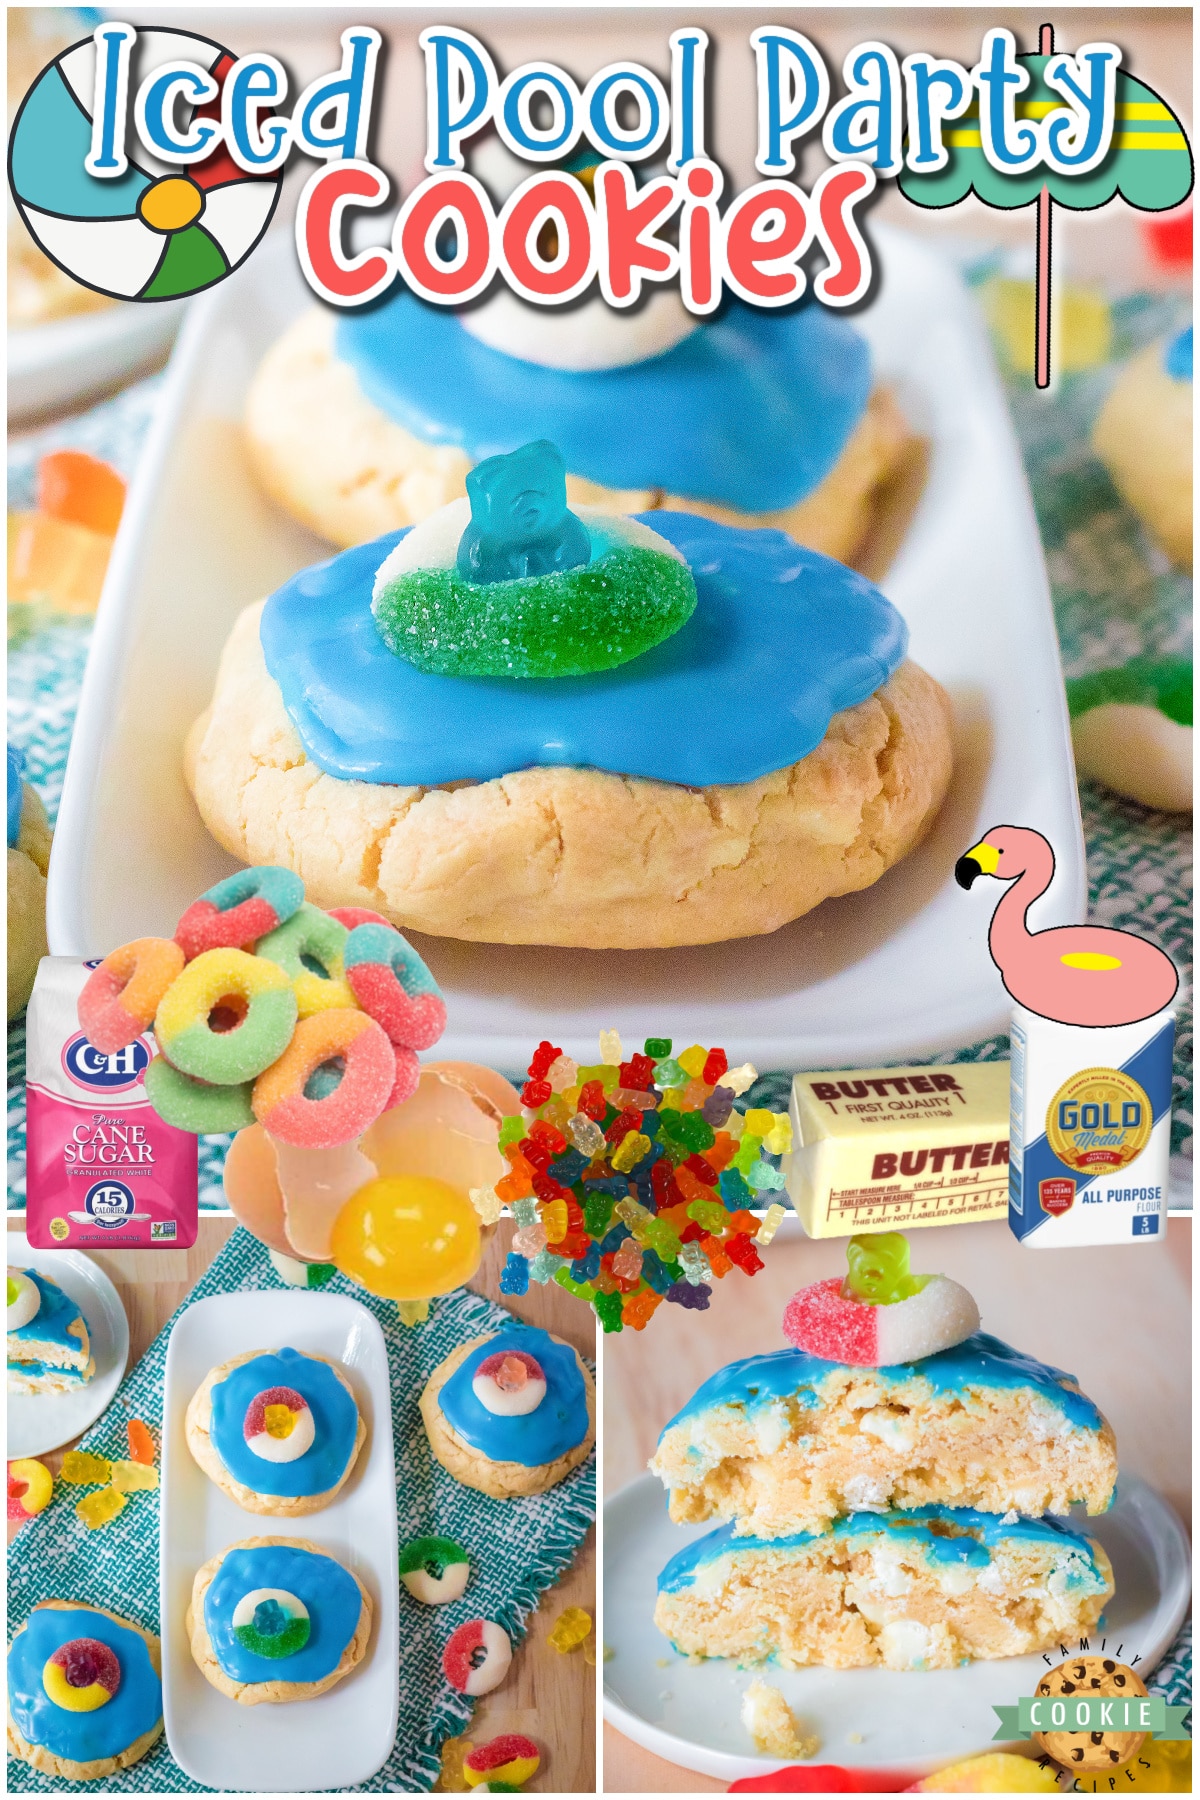 Pool Party Cookies are fun, festive cookies perfect for summer! Chewy creamsicle cookies topped with blue icing and a swimming gummy bear!